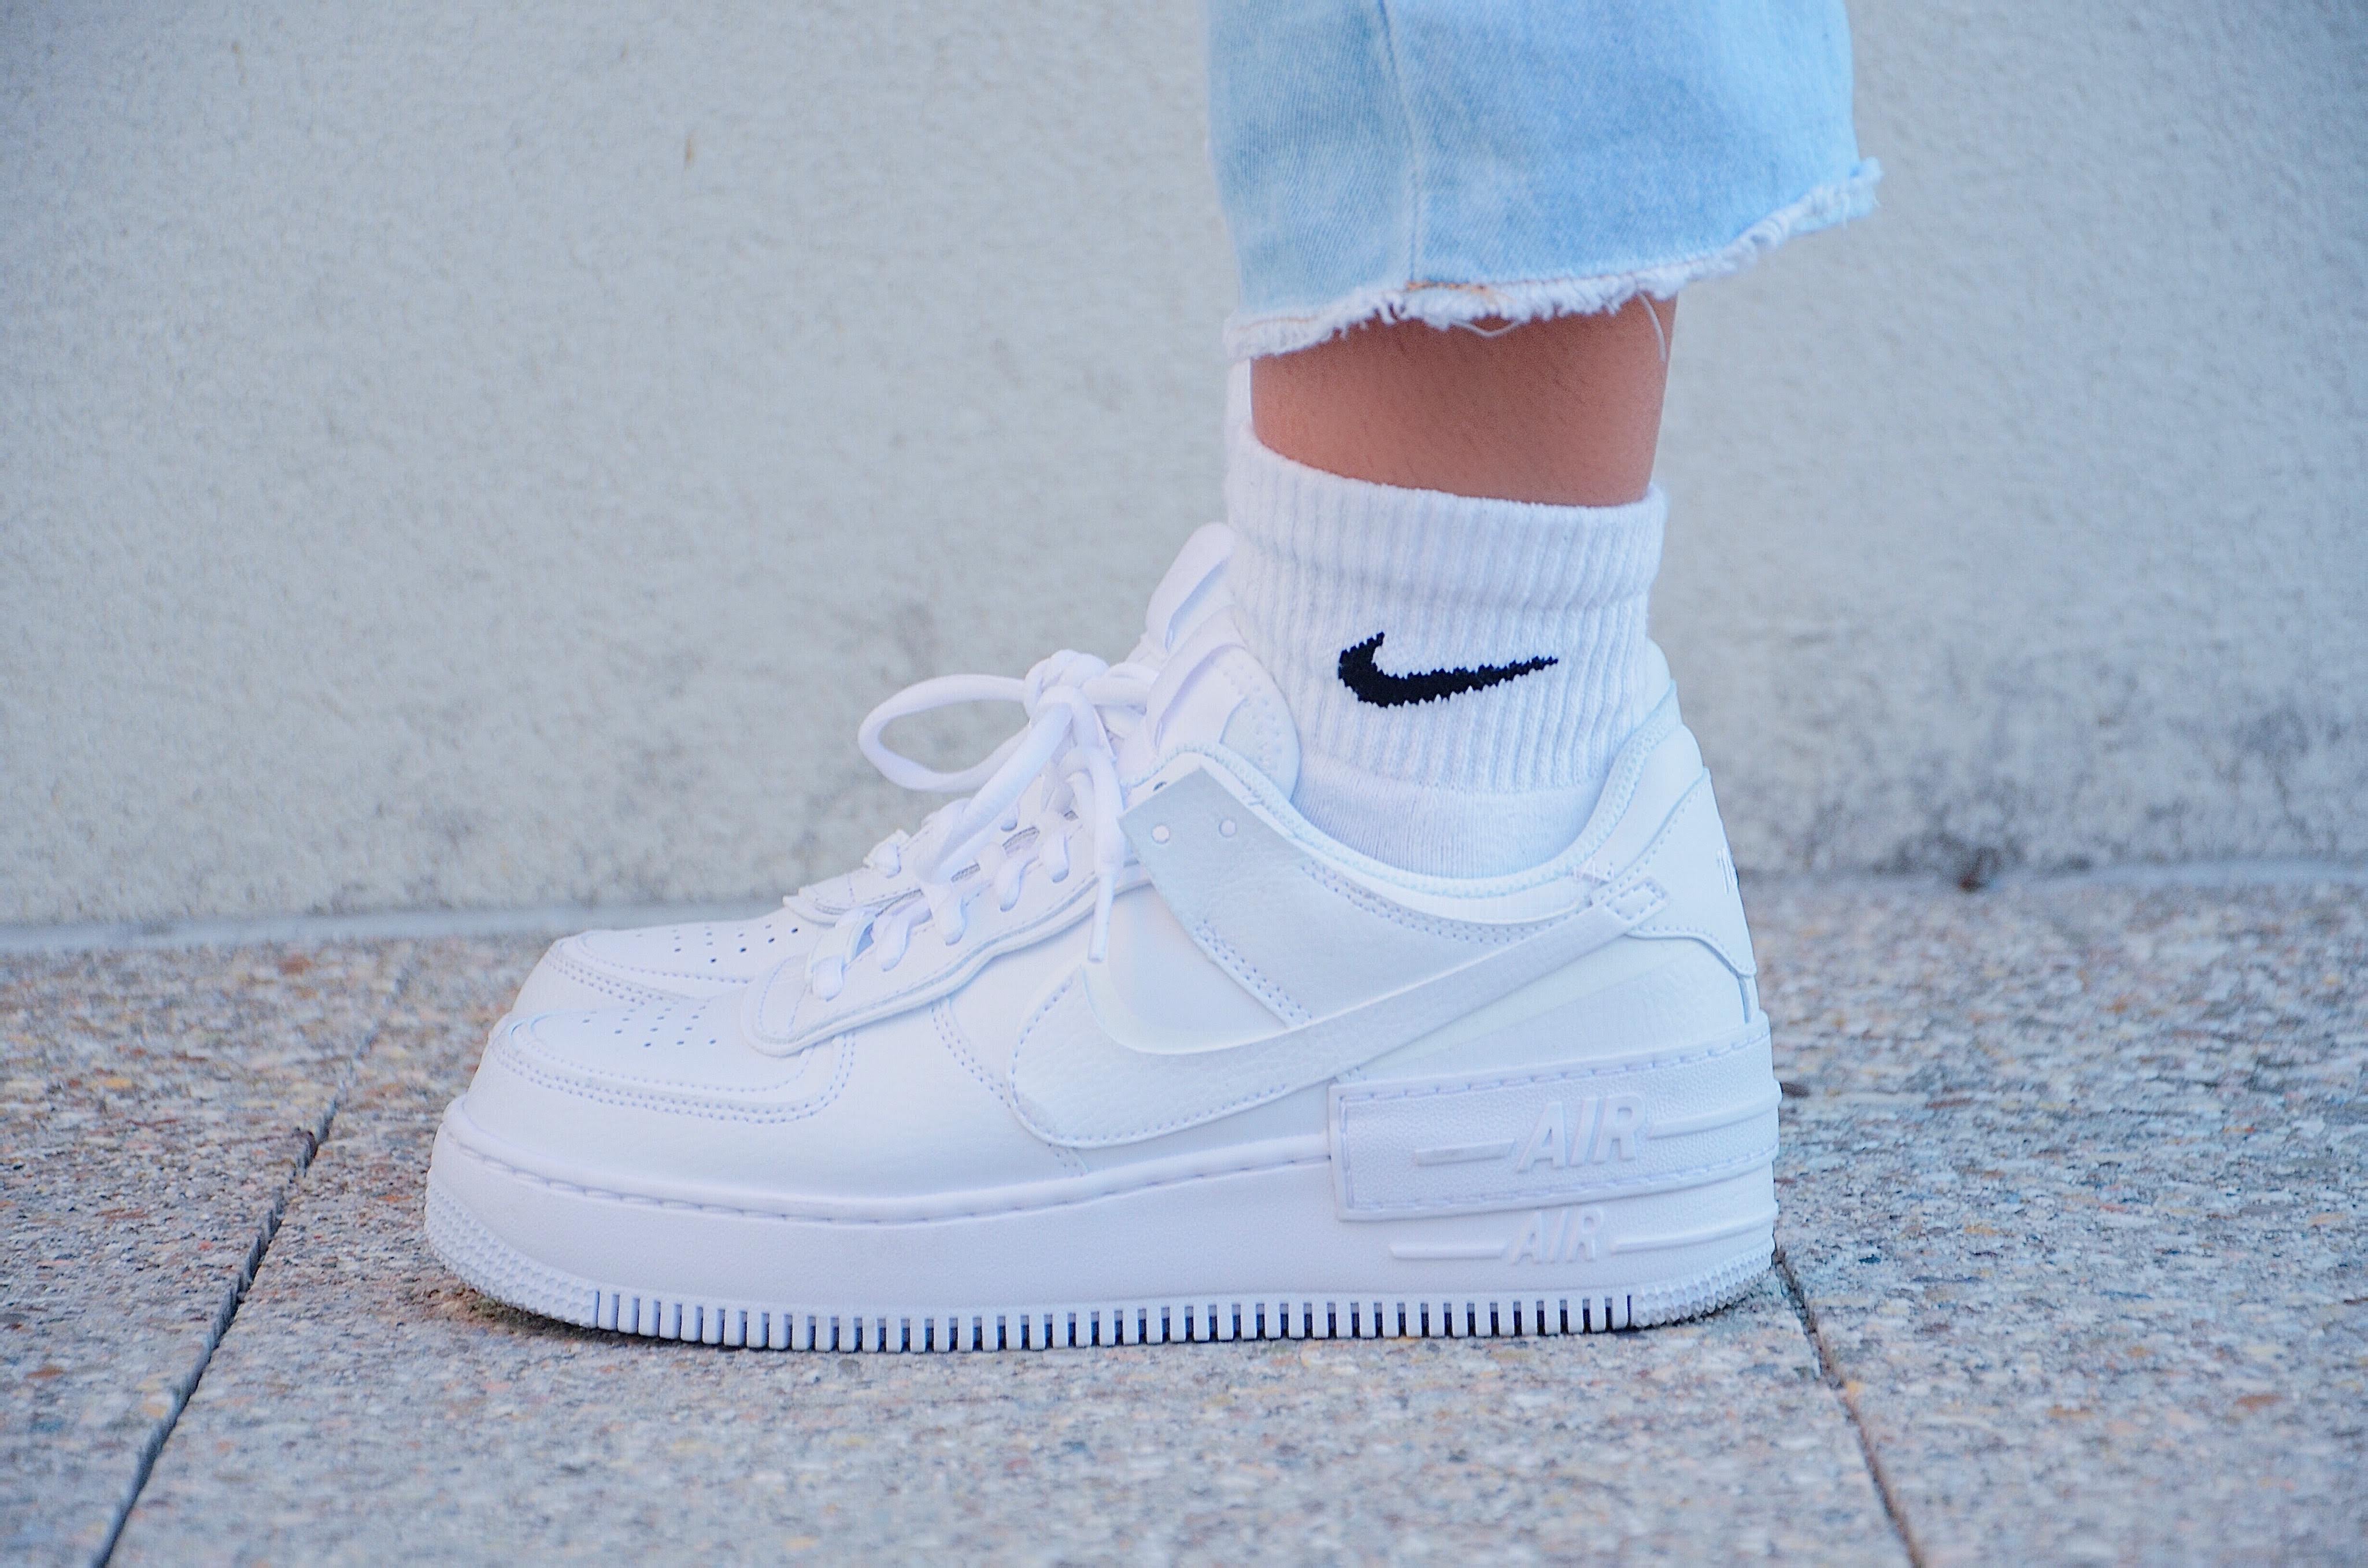 shoes similar to air force 1s